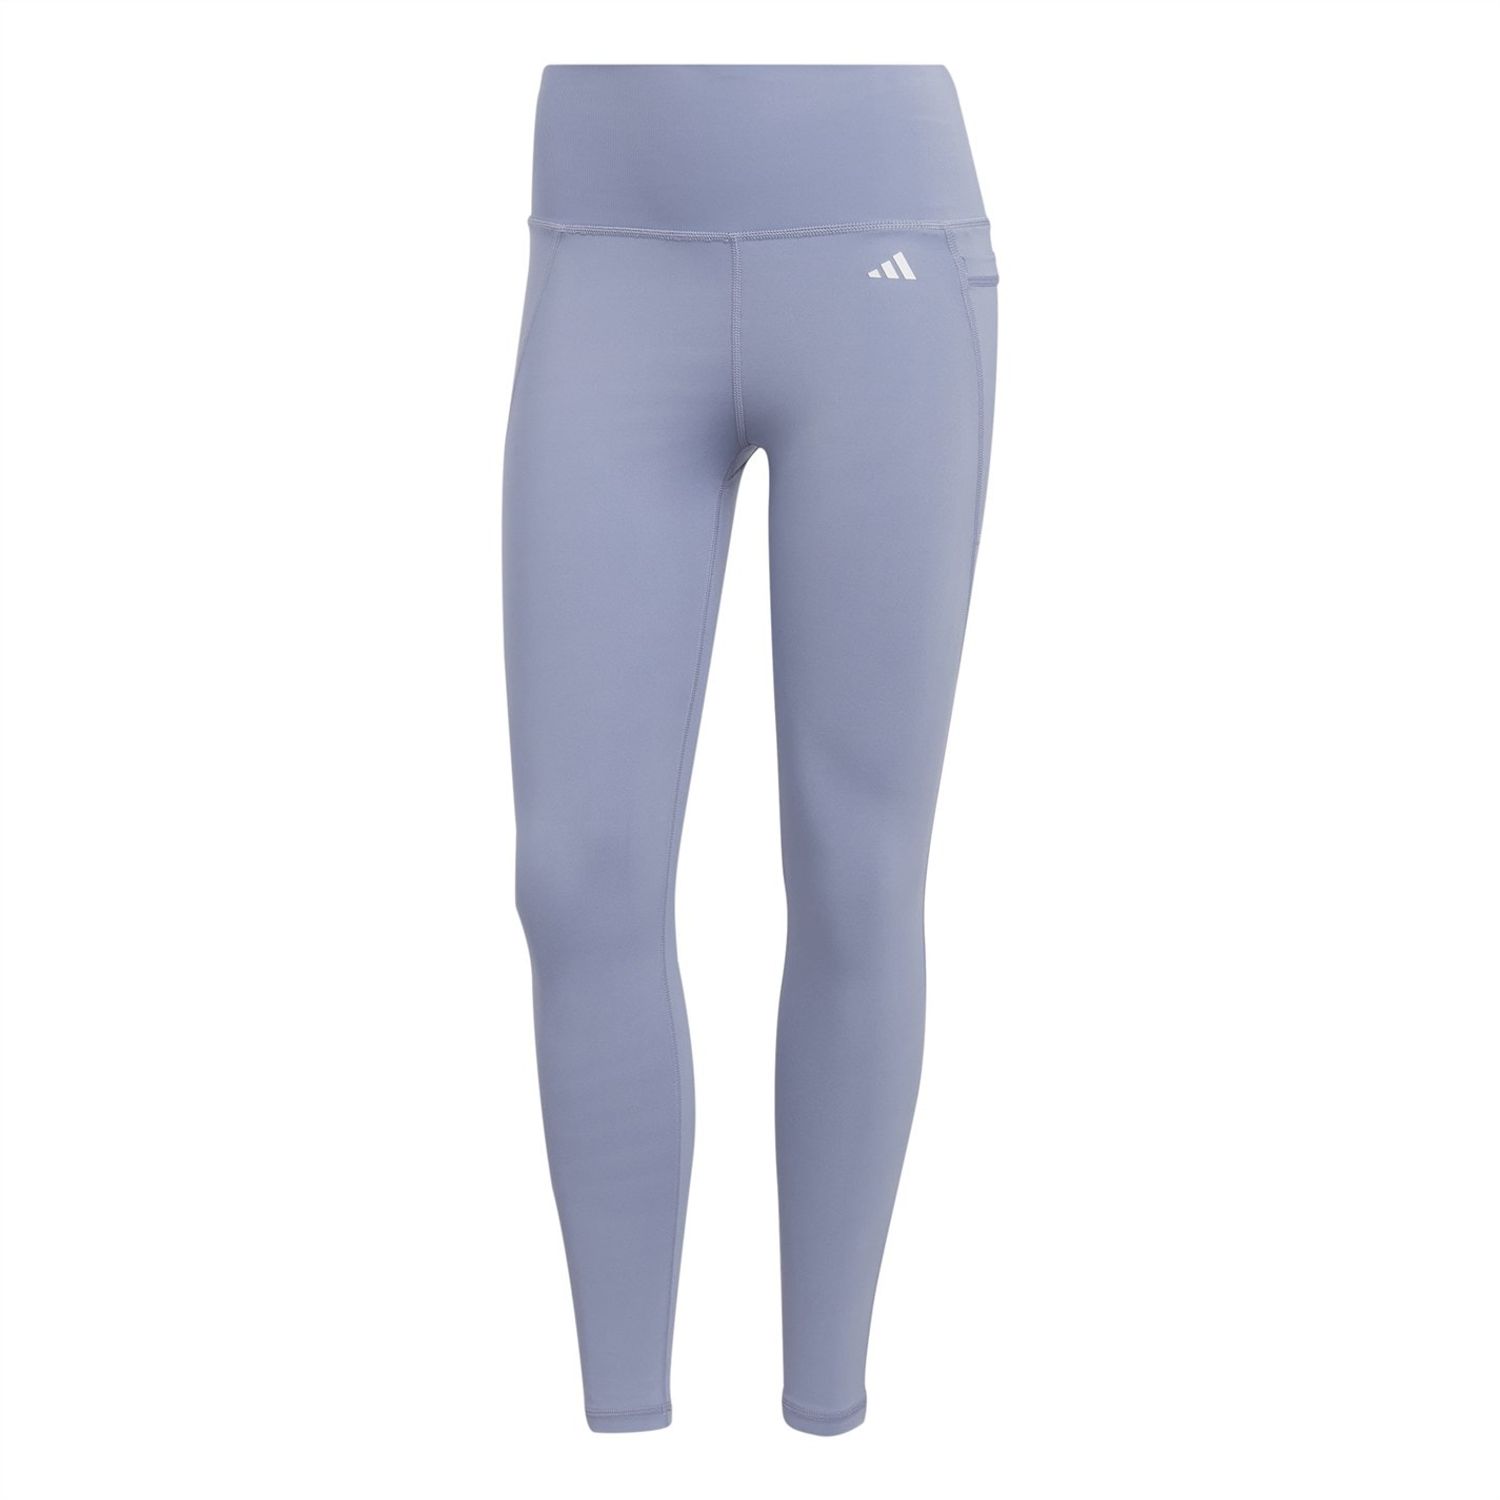 Silver adidas Womens Optime Training 7/8 Leggings - Get The Label